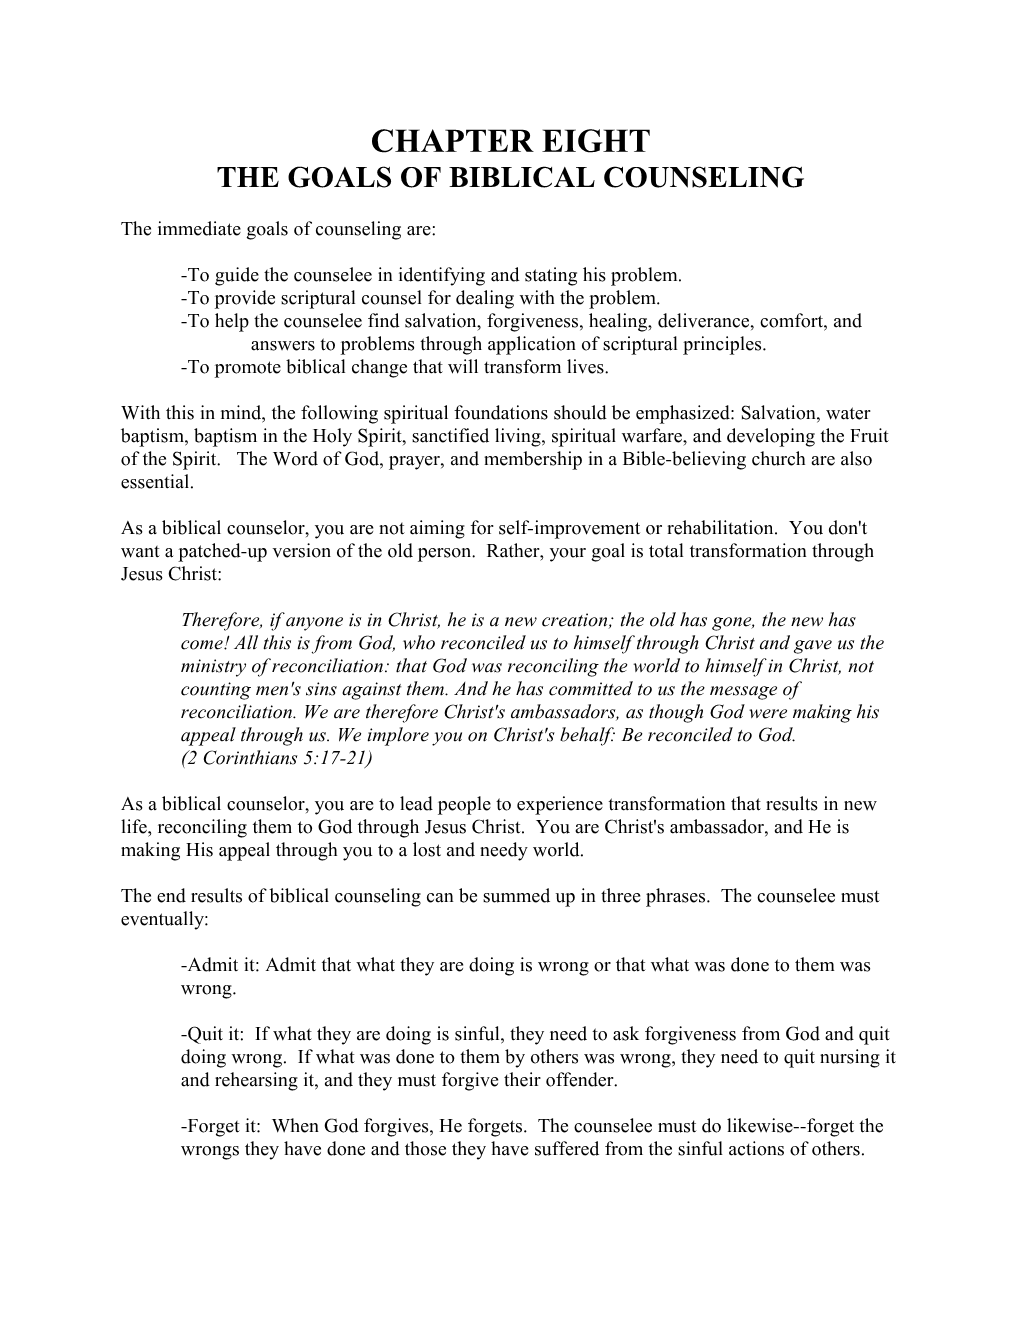 The Goals of Biblical Counseling